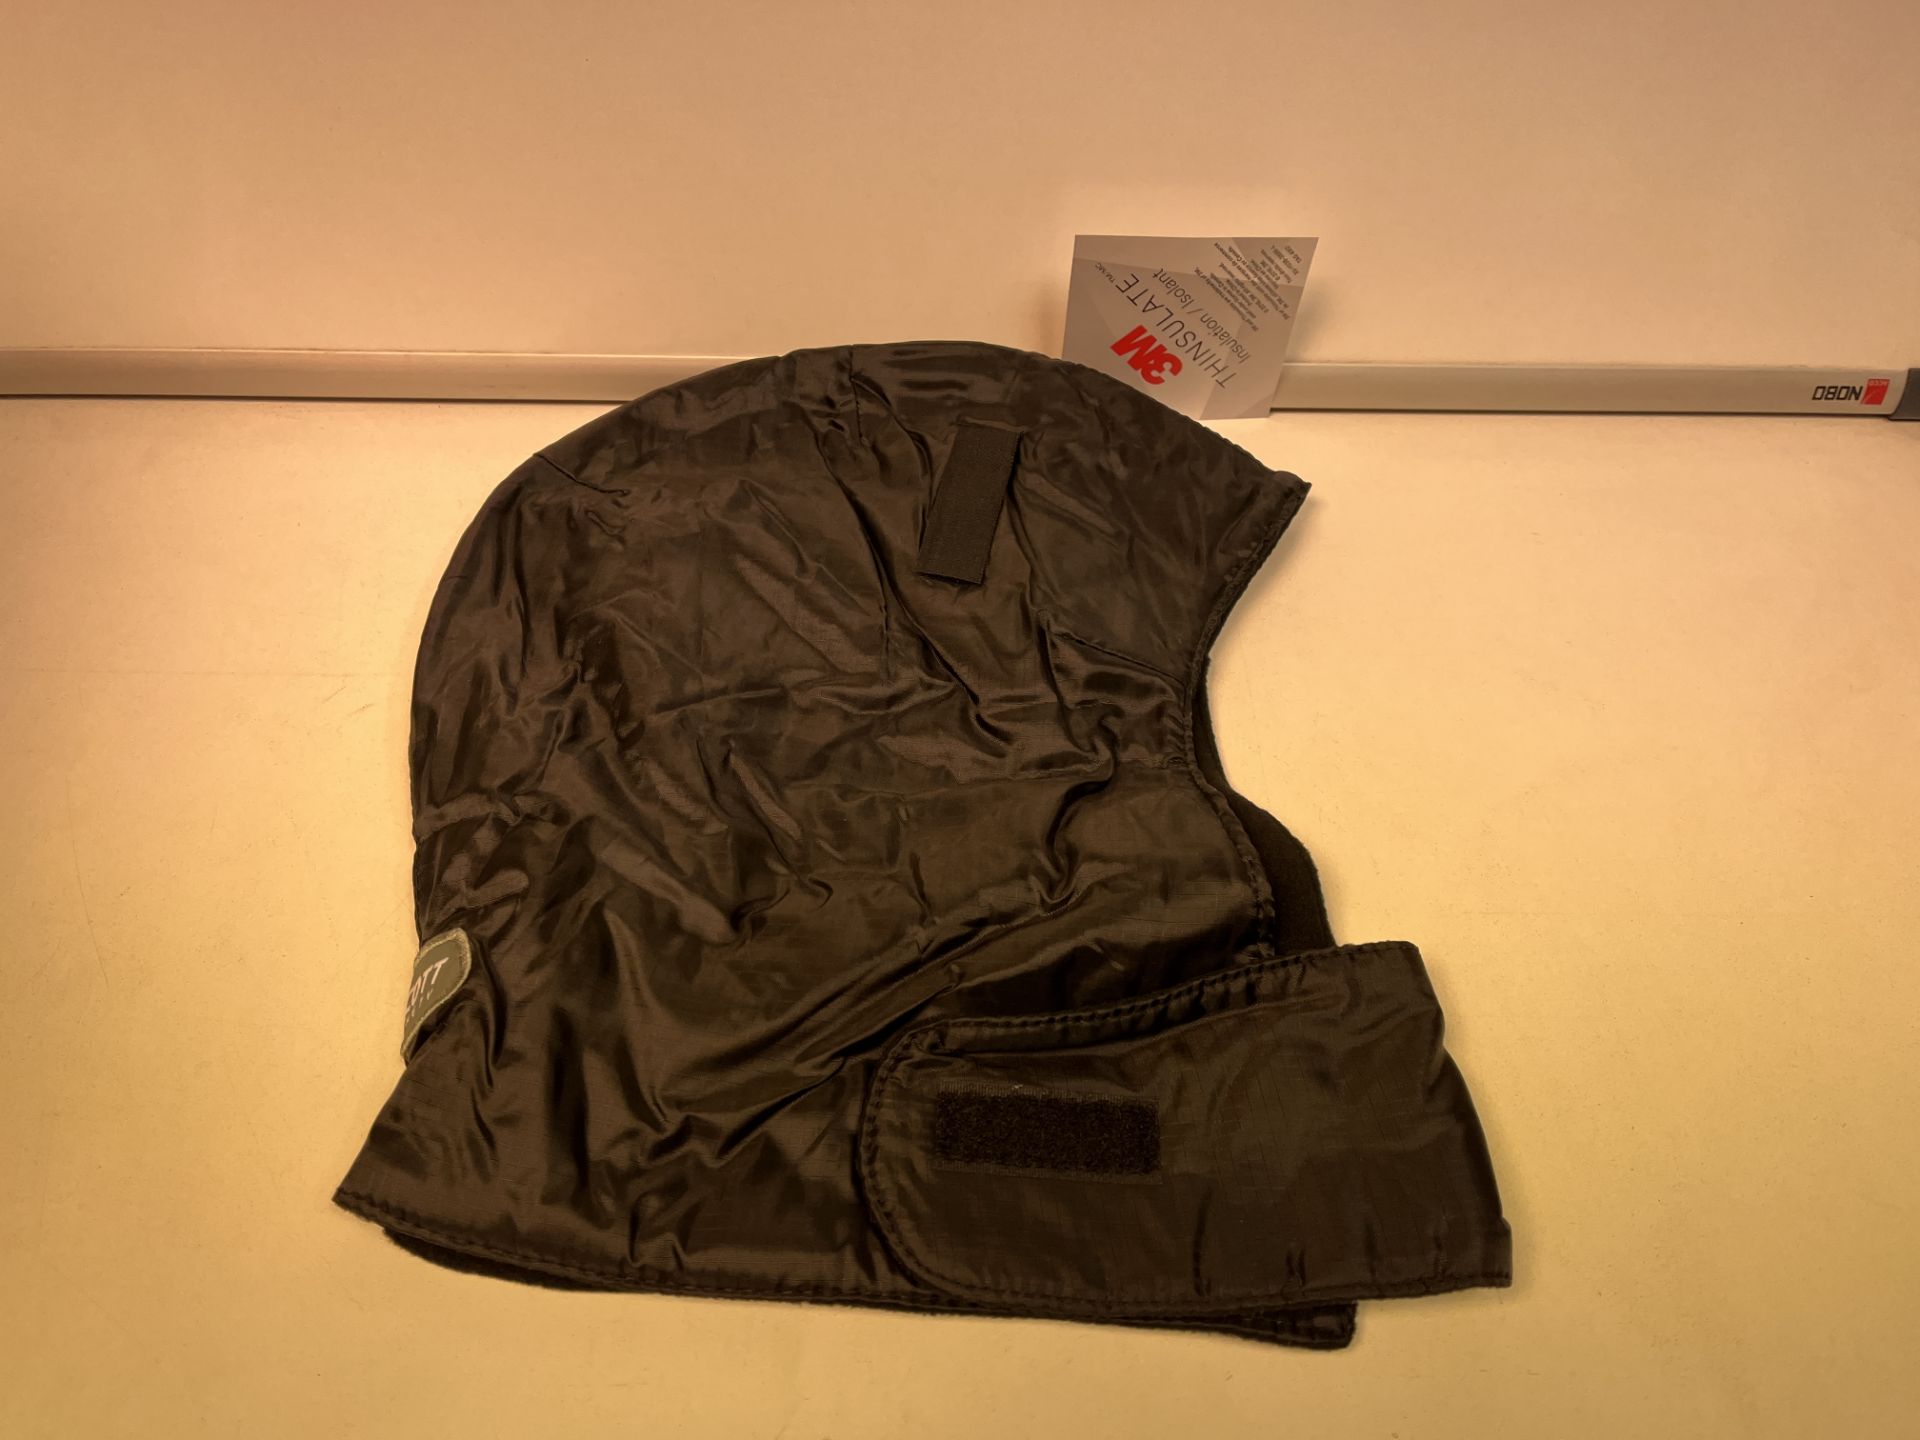 20 X BRAND NEW 3M SCOTT SAFETY THINSULATE WINTER HOOD LINERS BLACK RRP £20 PER PACK INSL